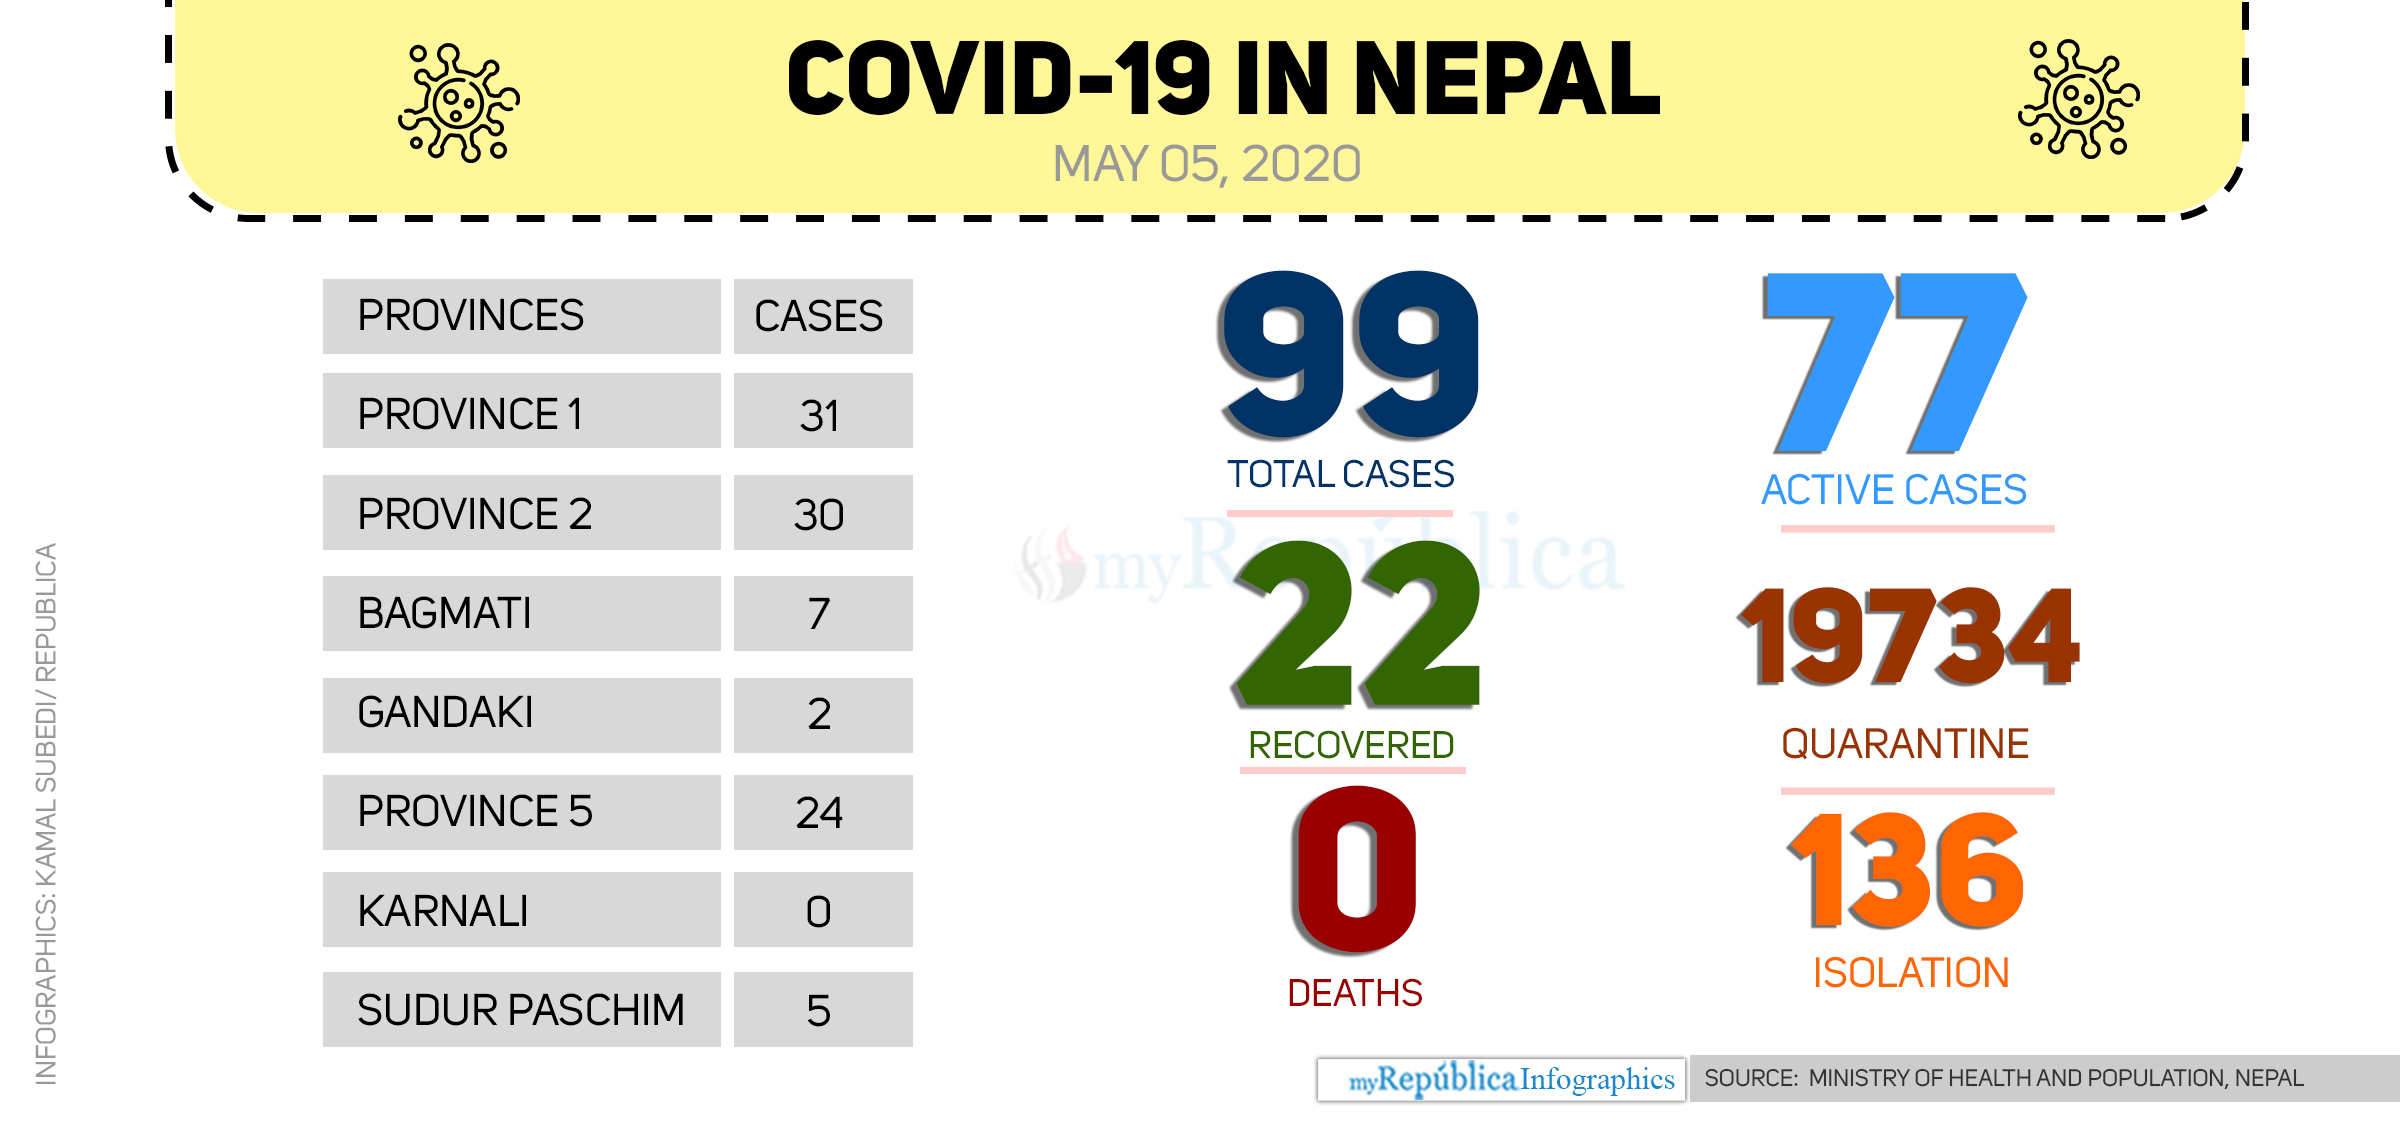 With 17 new cases today, the total COVID-19 cases in Nepal climb to 99 (with video)